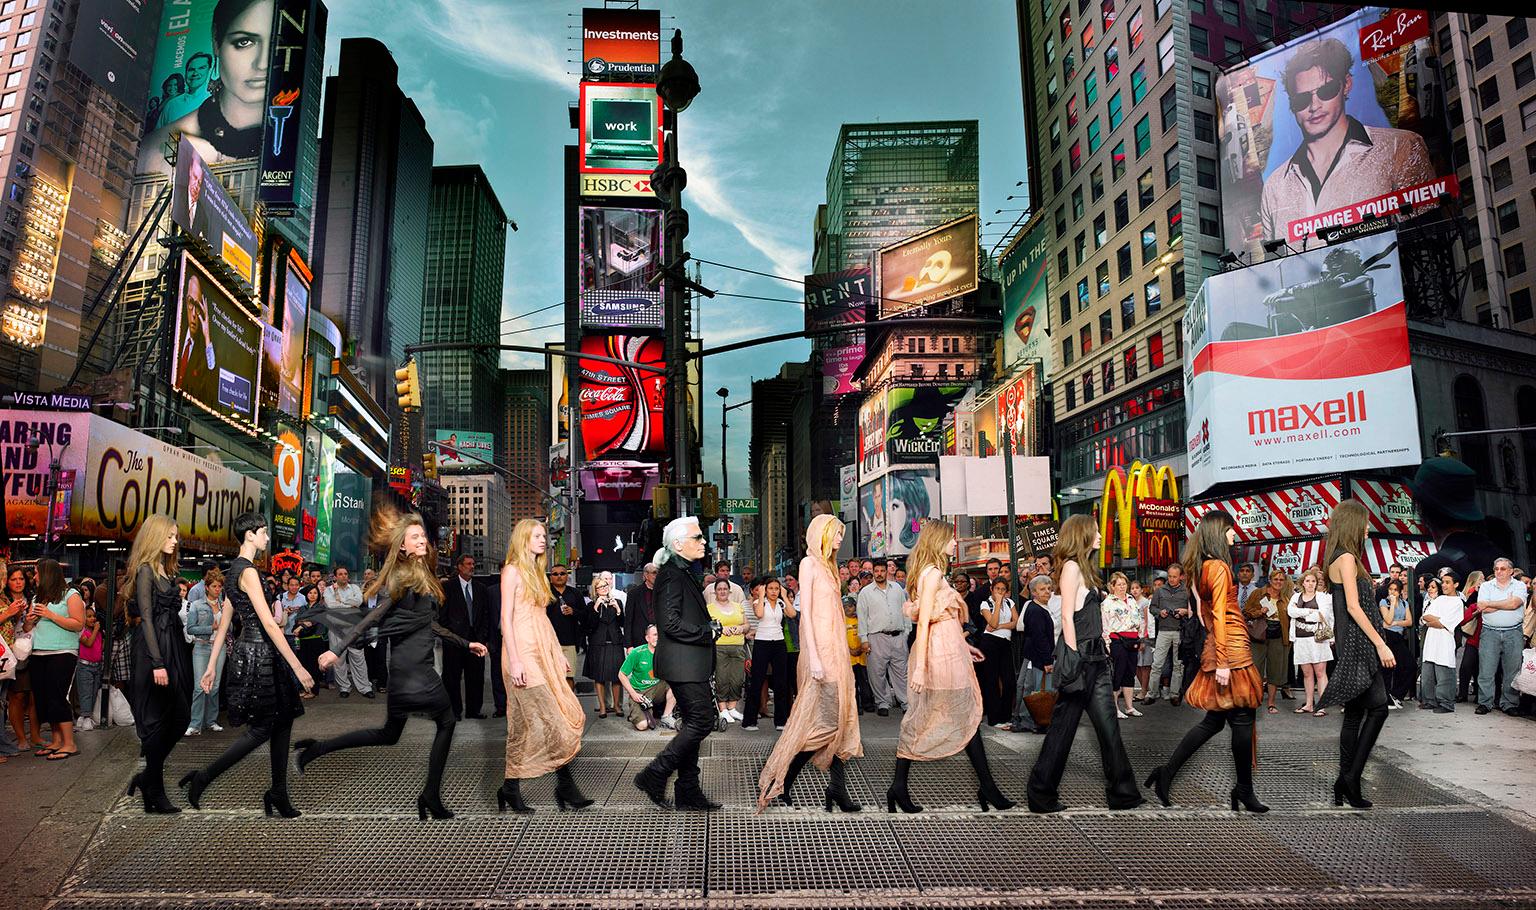 "Karl Lagerfeld in Times Square, Editorial for Harper's Bazaar 2006, NYC"